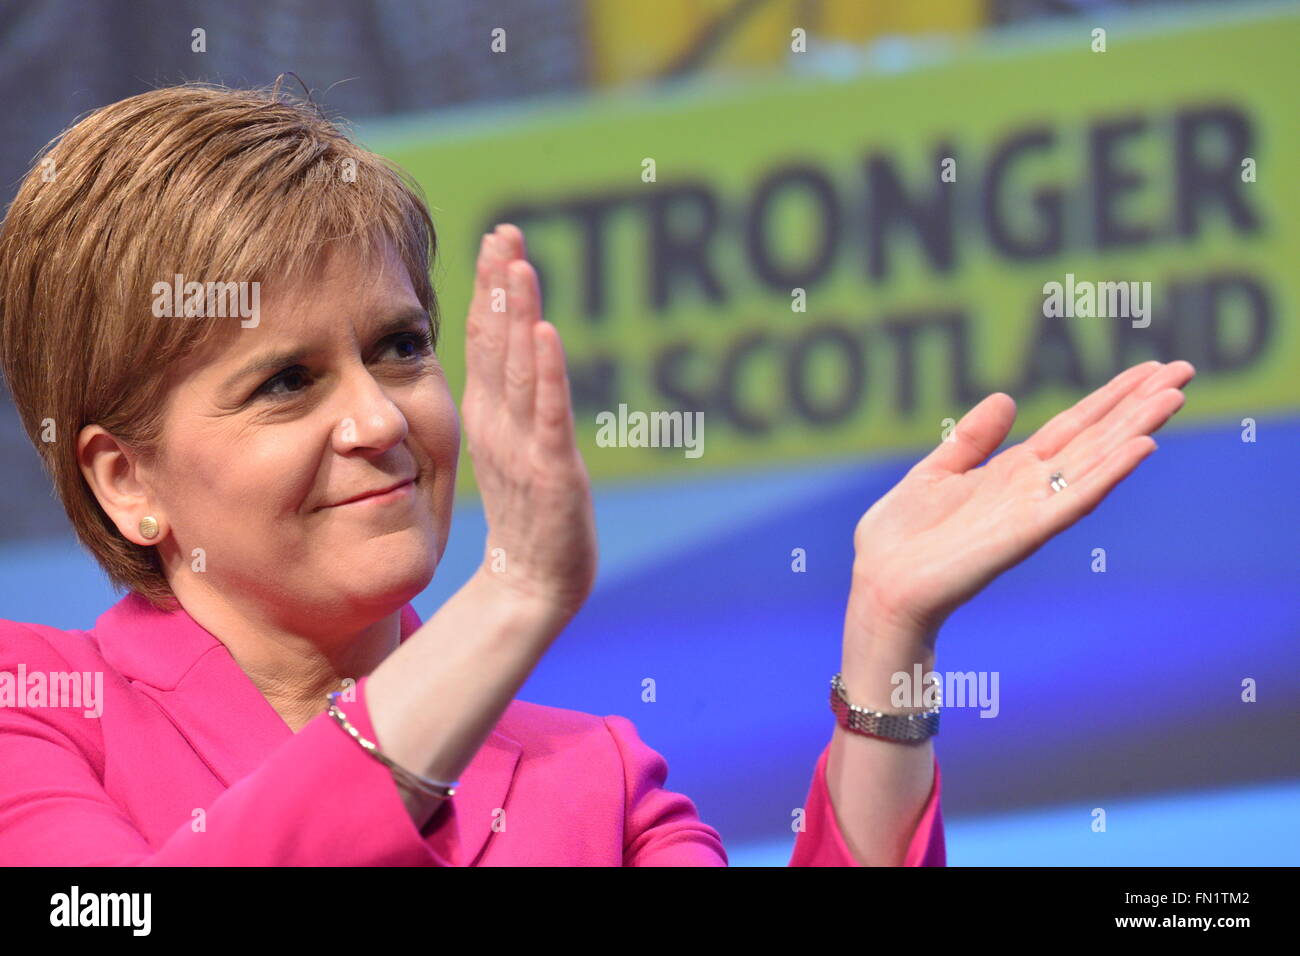 Glasgow, Scotland, GBR - 13  March: Nicola Sturgeon MSP - First Minister of Scotland and party leader - on the final day of the  Scottish National Party (SNP) Spring Conference which took place Sunday 13 March 2016 in Glasgow, Scotland. Stock Photo